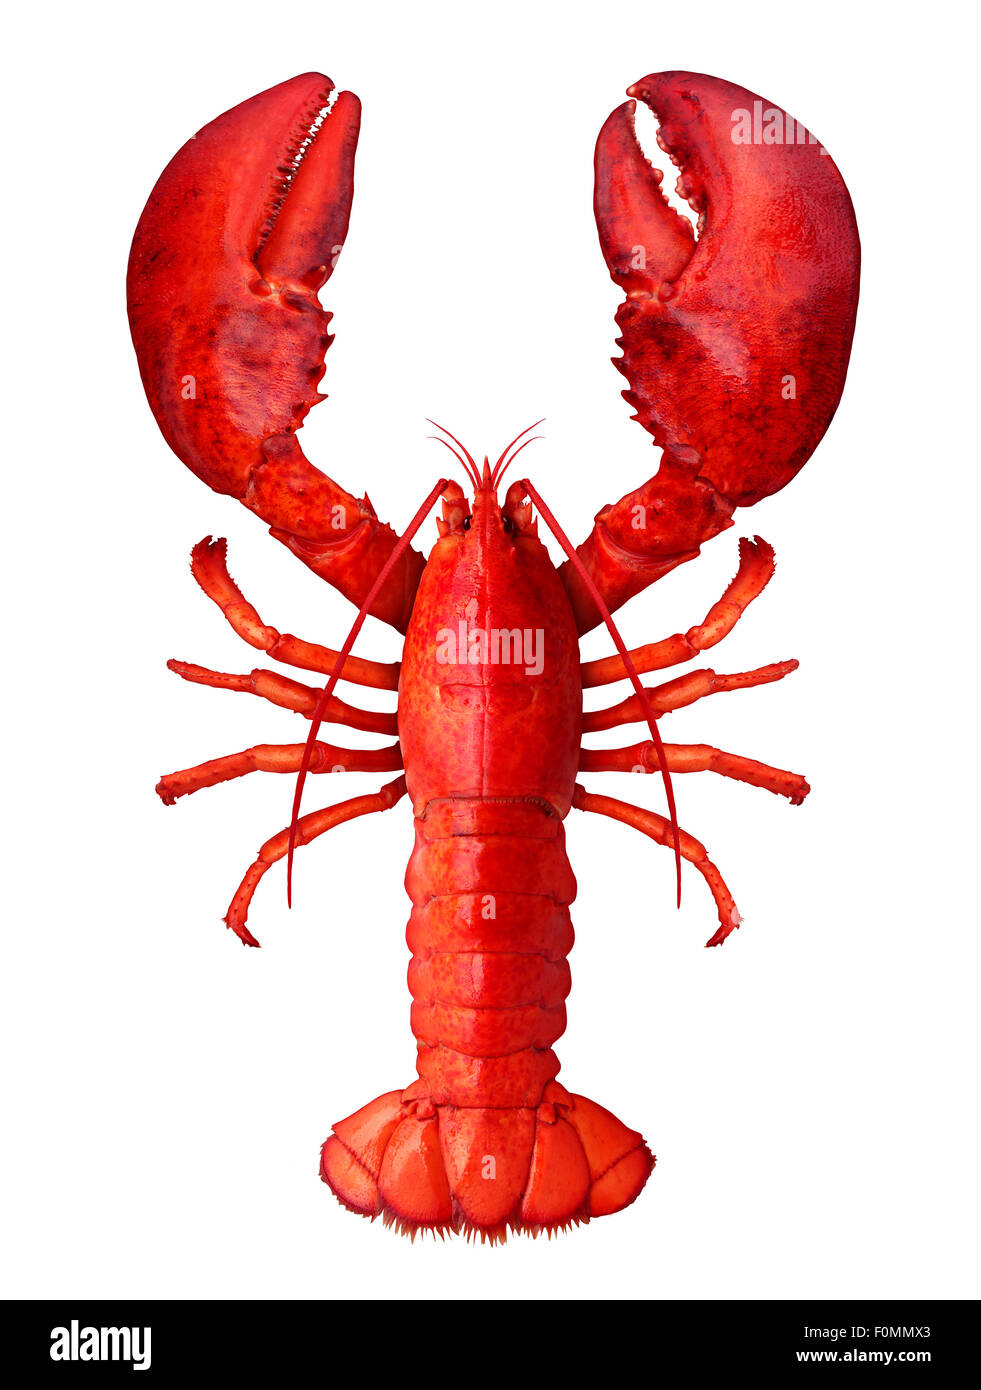 Lobster isolated on a white background as fresh seafood or shellfish food concept as a complete red shell crustacean in an overhead view isolated on a white background. Stock Photo